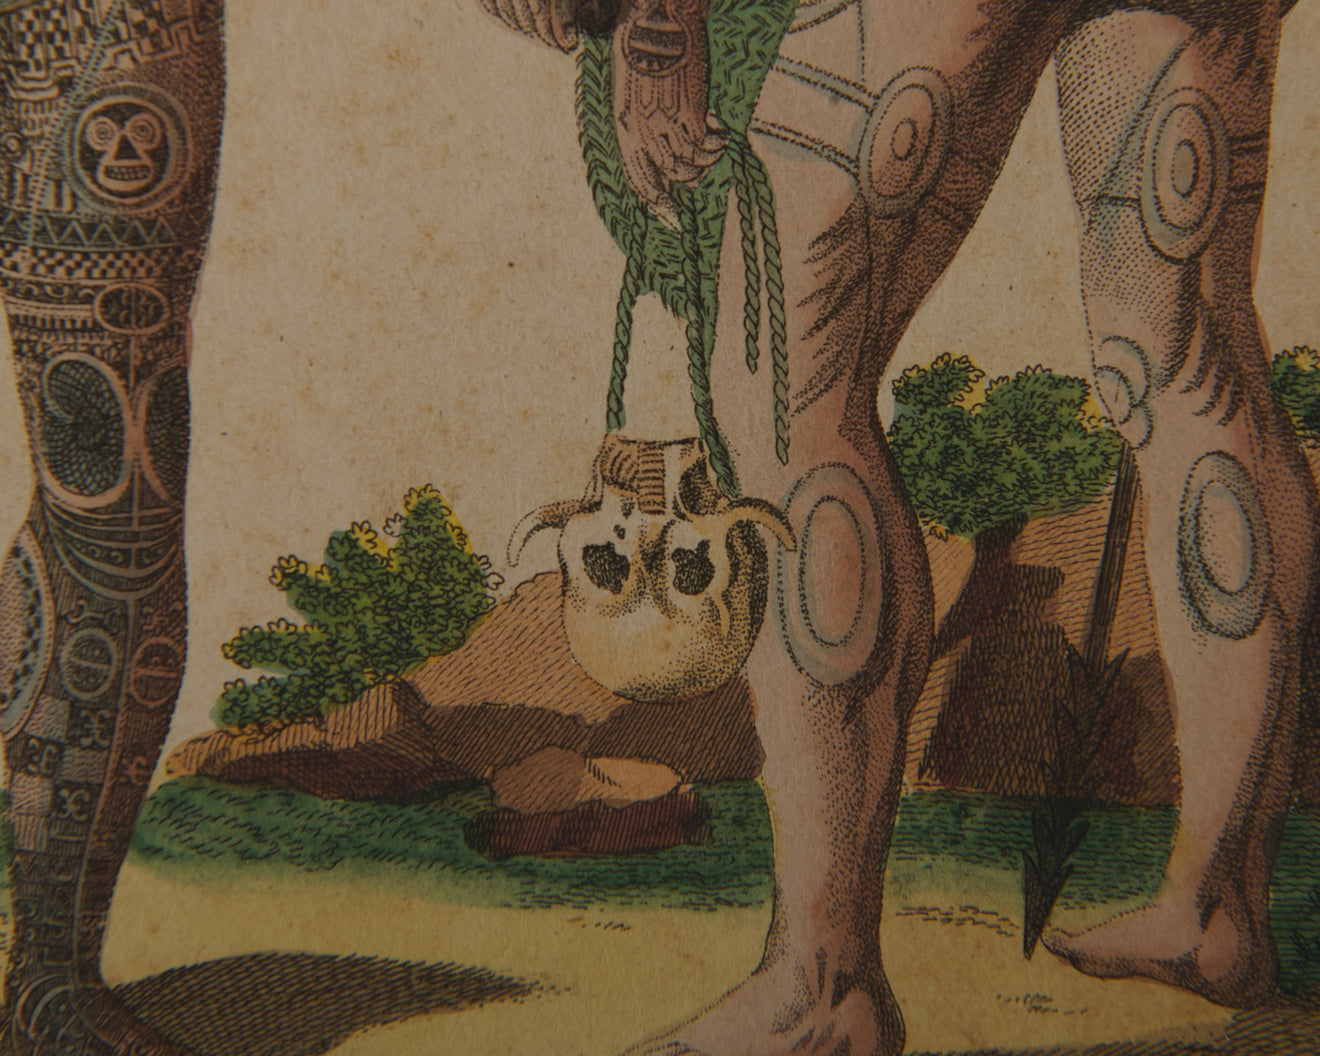 HAND COLORED ENGRAVINGS OF TATTOOED WARRIORS BY PAUL D STEWART